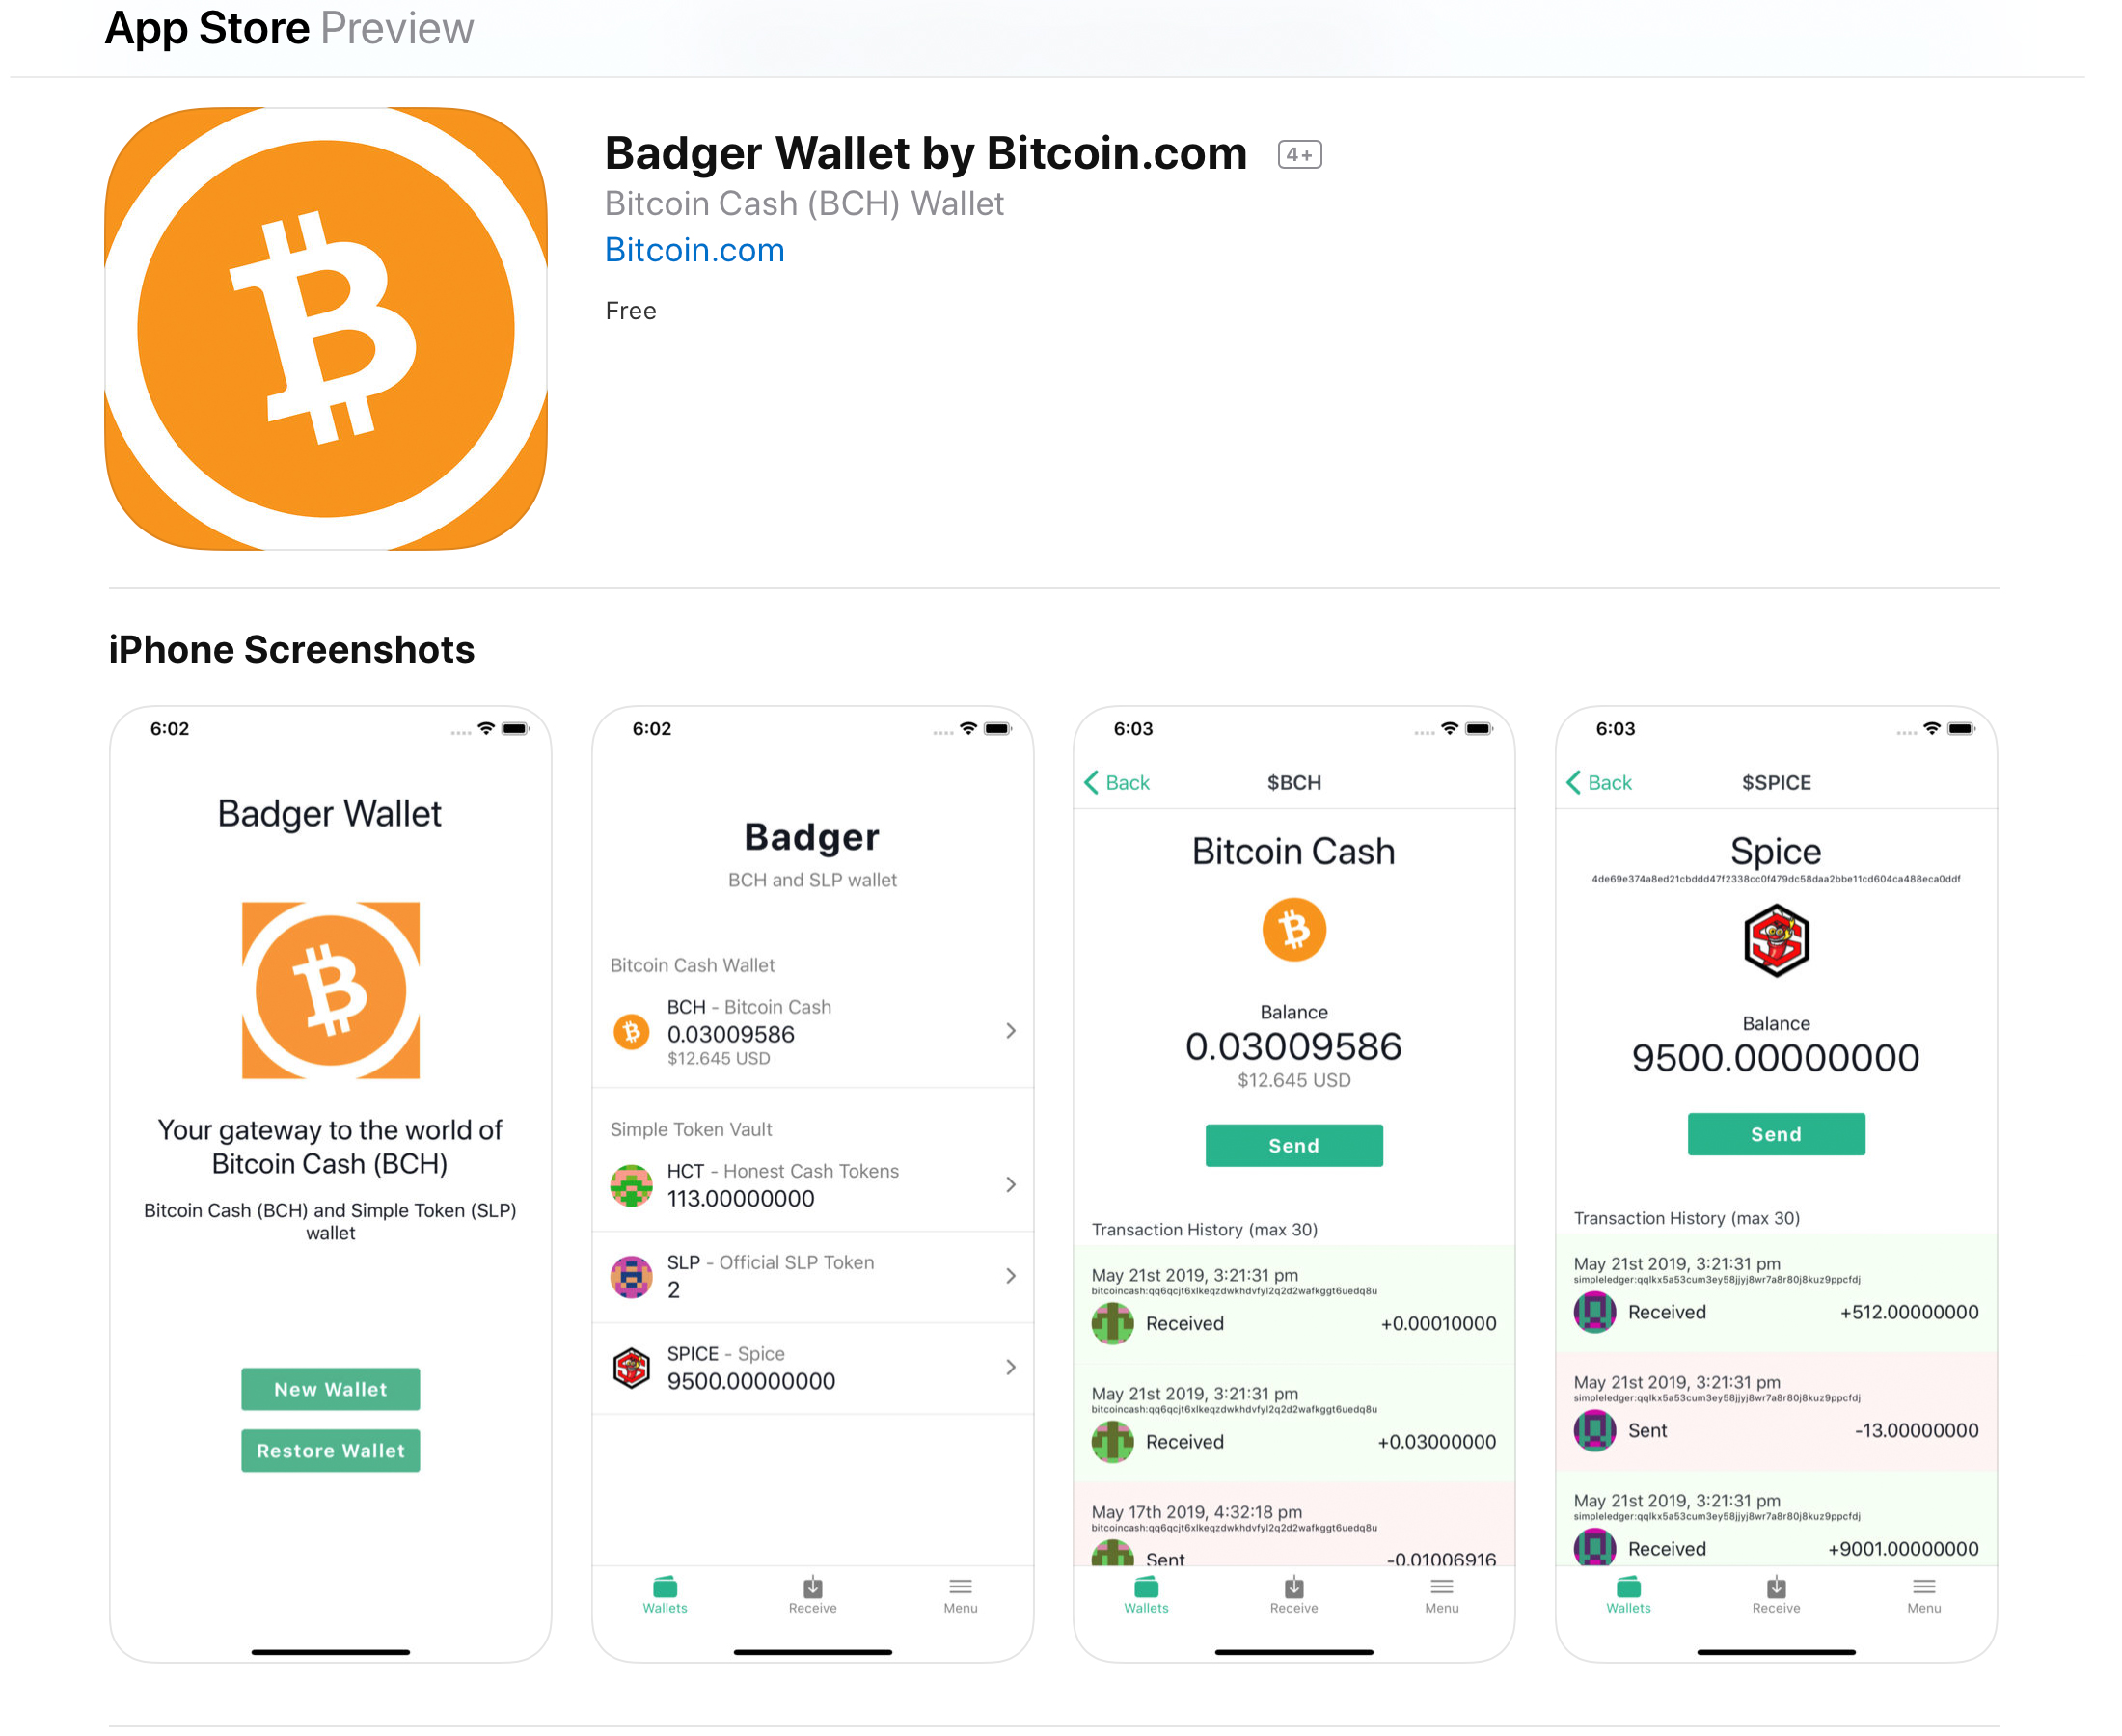 Bitcoin Cash and SLP-Fueled Badger Wallet Launches for iOS 